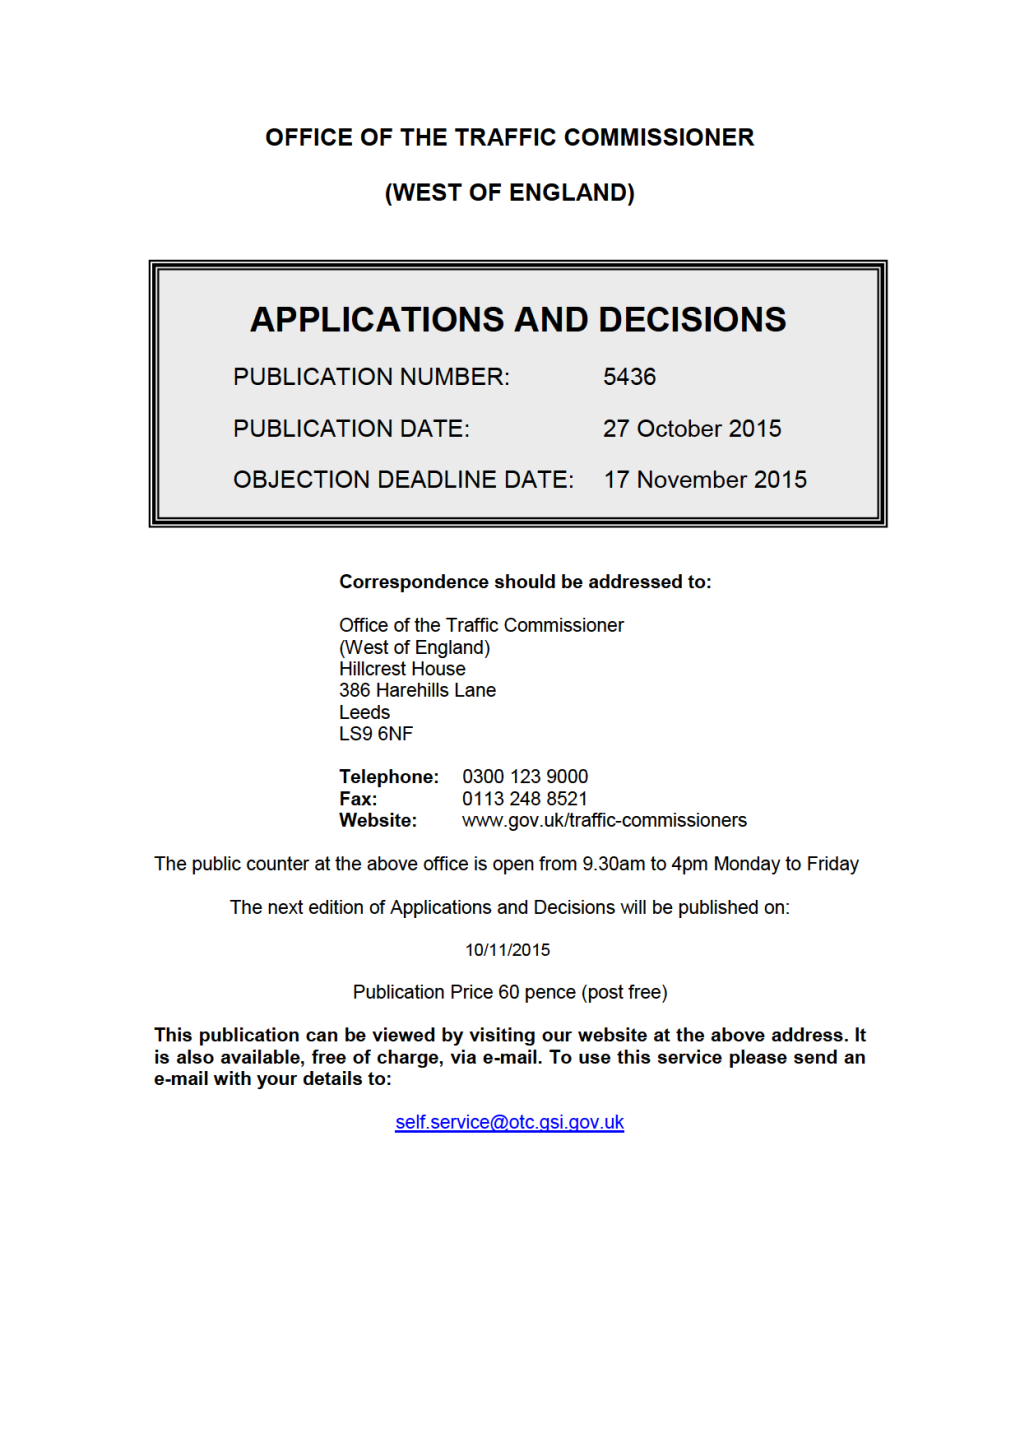 APPLICATIONS and DECISIONS 27 October 2015